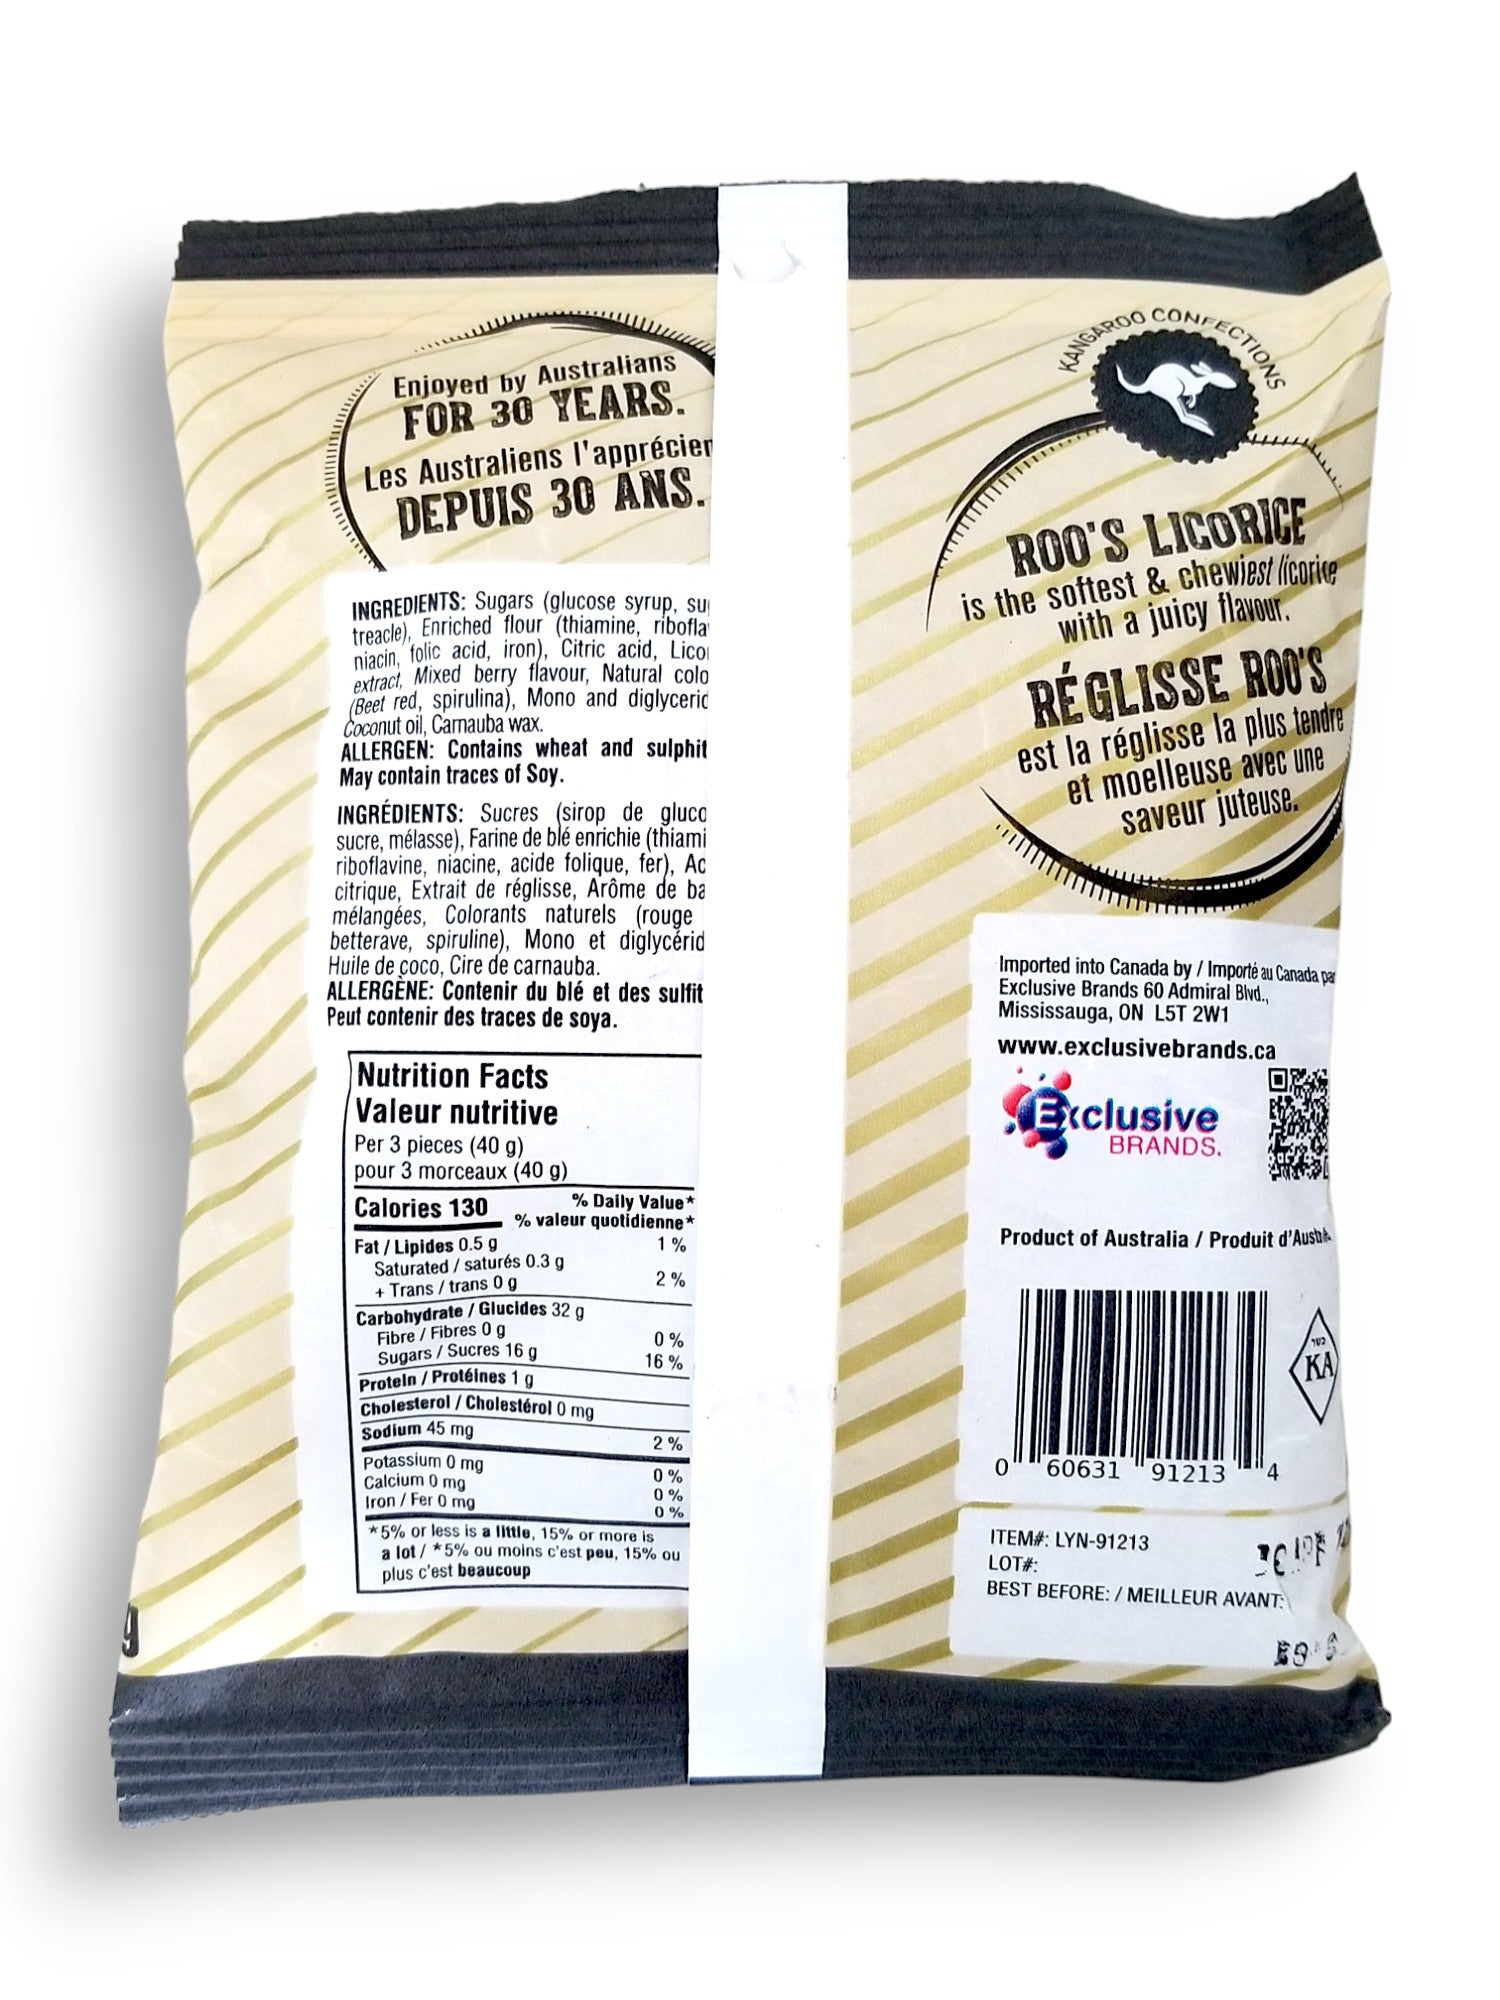 Roo's Australian All Natural Soft Licorice, Mixed Berry Flavor, 120g, back of bag.